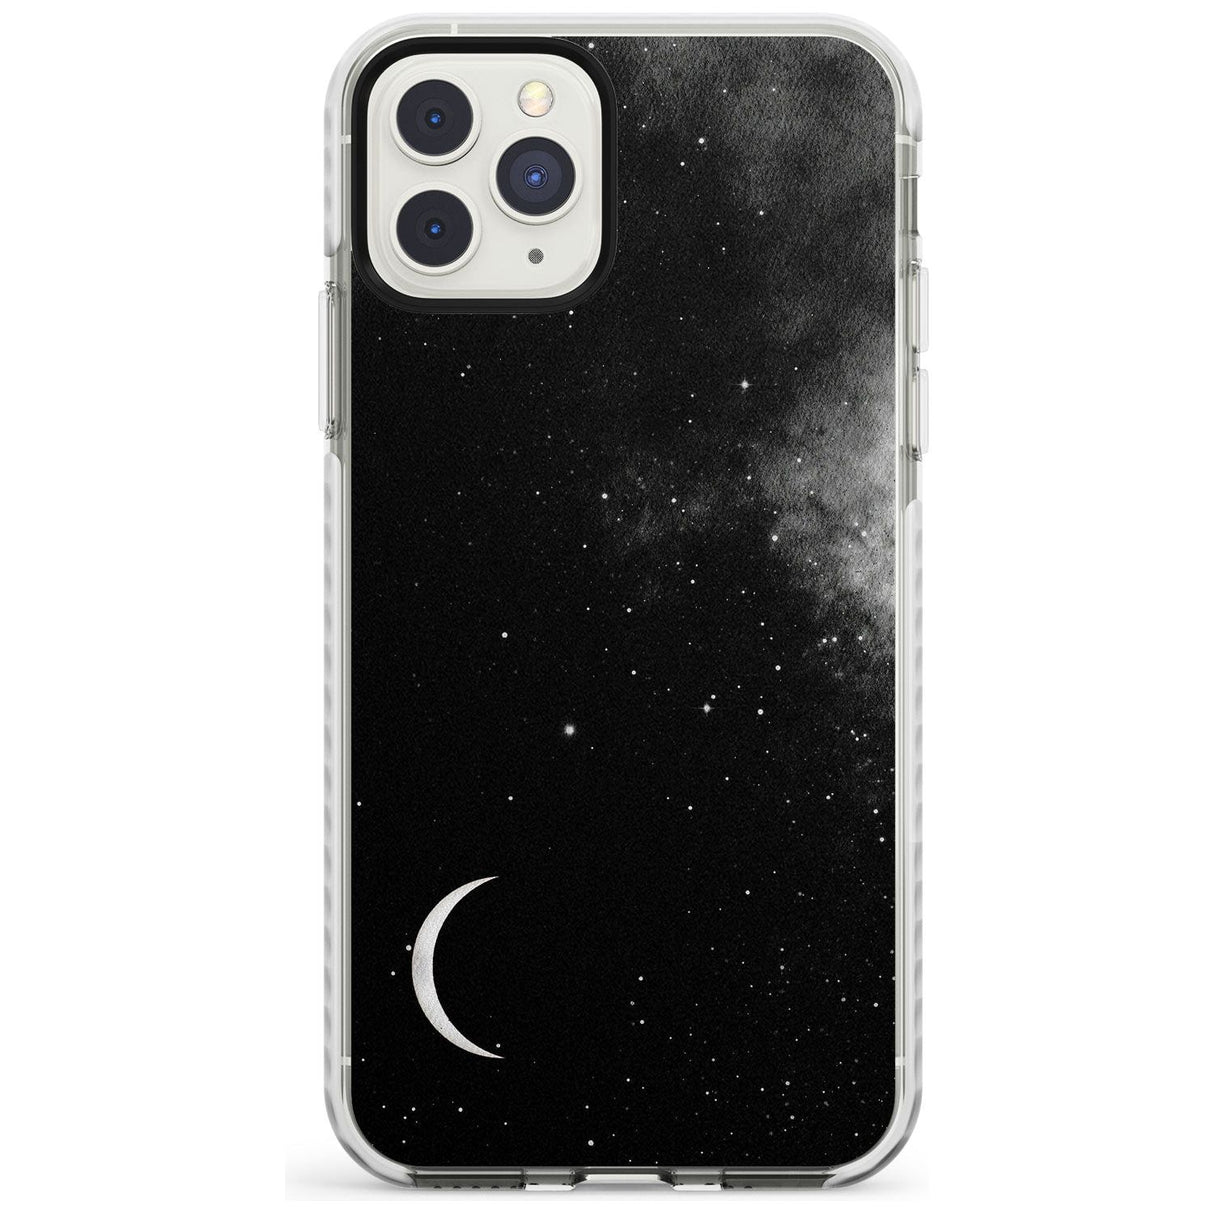 Night Sky Galaxies: Crescent Moon Phone Case iPhone 11 Pro Max / Impact Case,iPhone 11 Pro / Impact Case,iPhone 12 Pro / Impact Case,iPhone 12 Pro Max / Impact Case Blanc Space